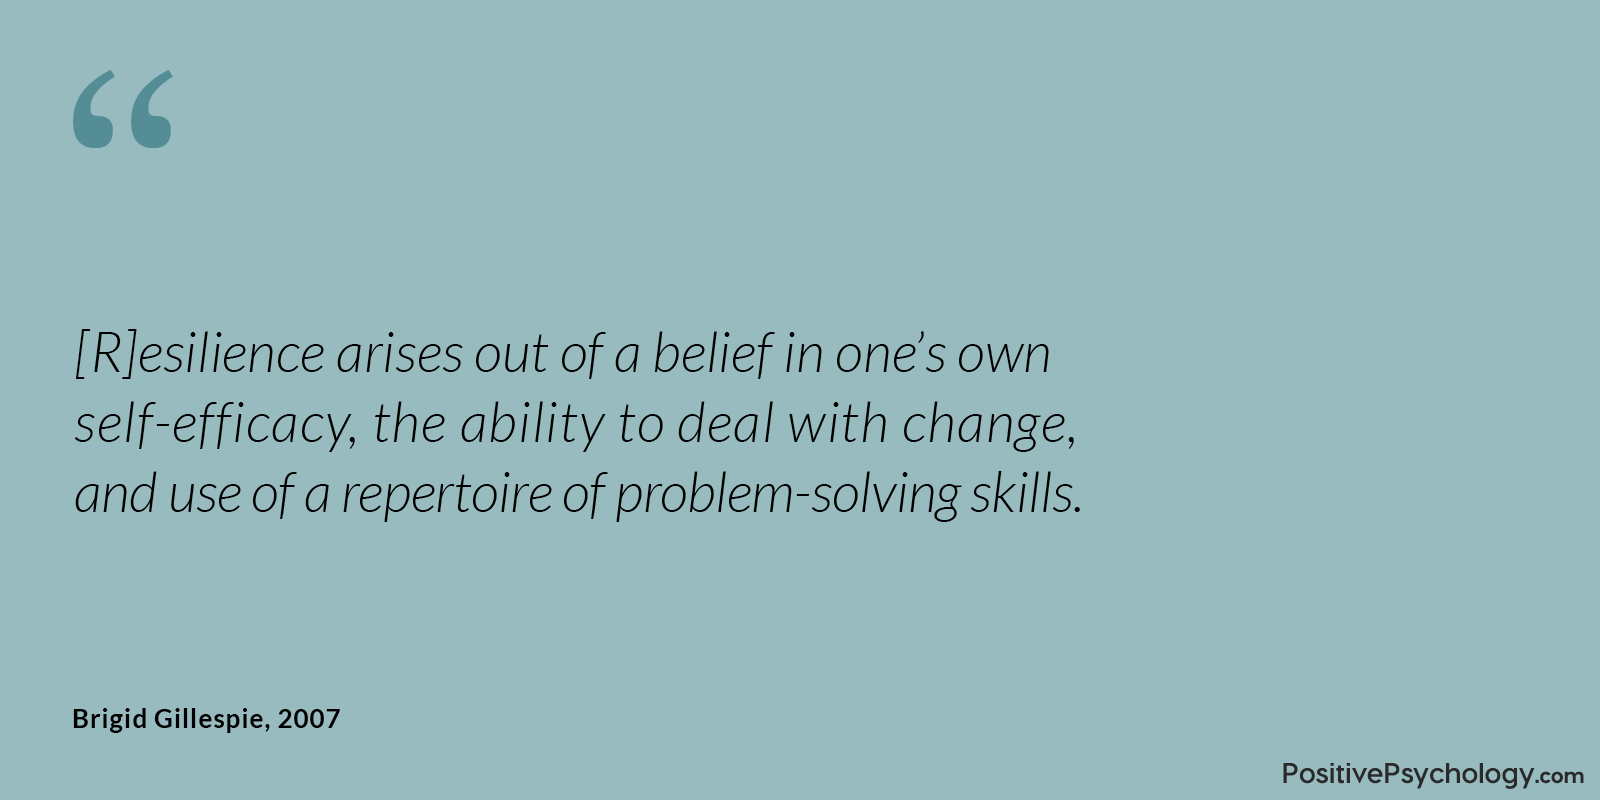 Gillespie and Colleagues Resilience Self-efficacy Belief Quote